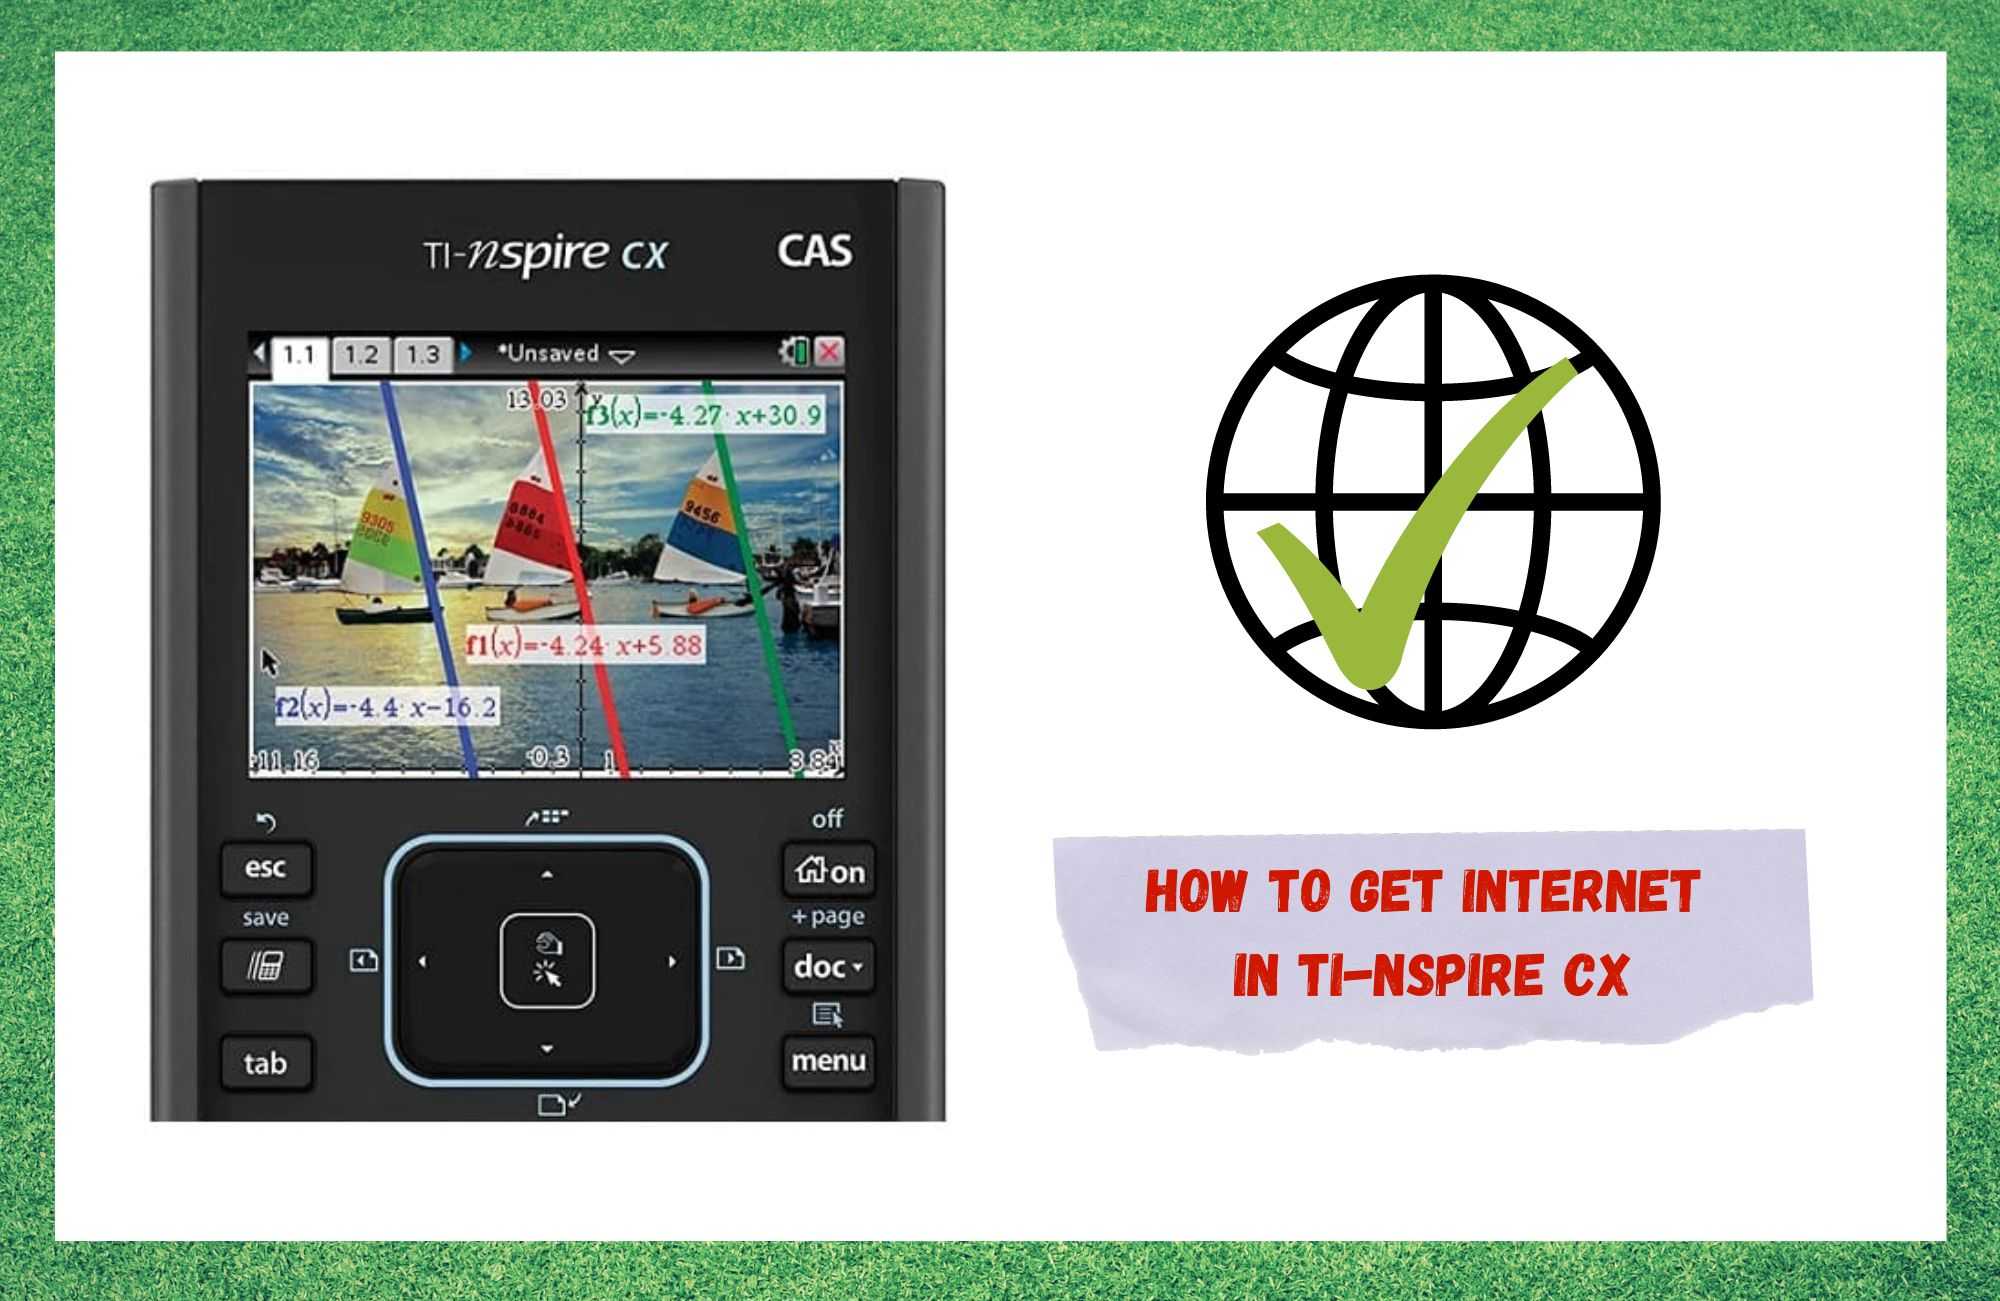 How To Get Internet In Ti-Nspire CX